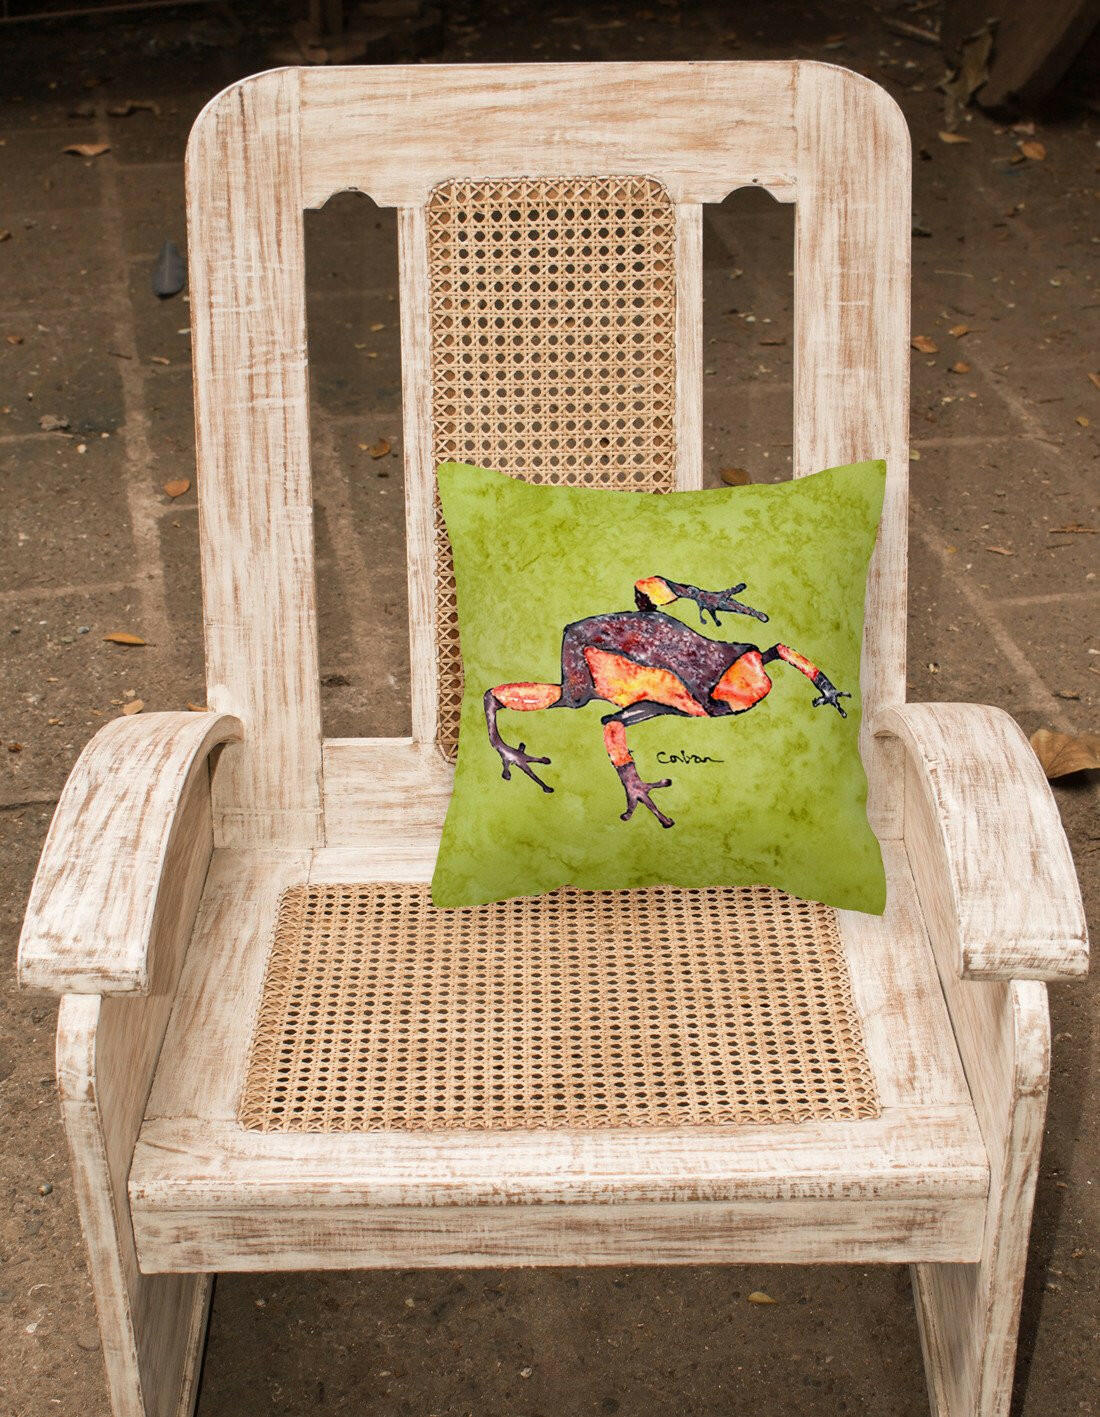 Frog Decorative   Canvas Fabric Pillow - the-store.com